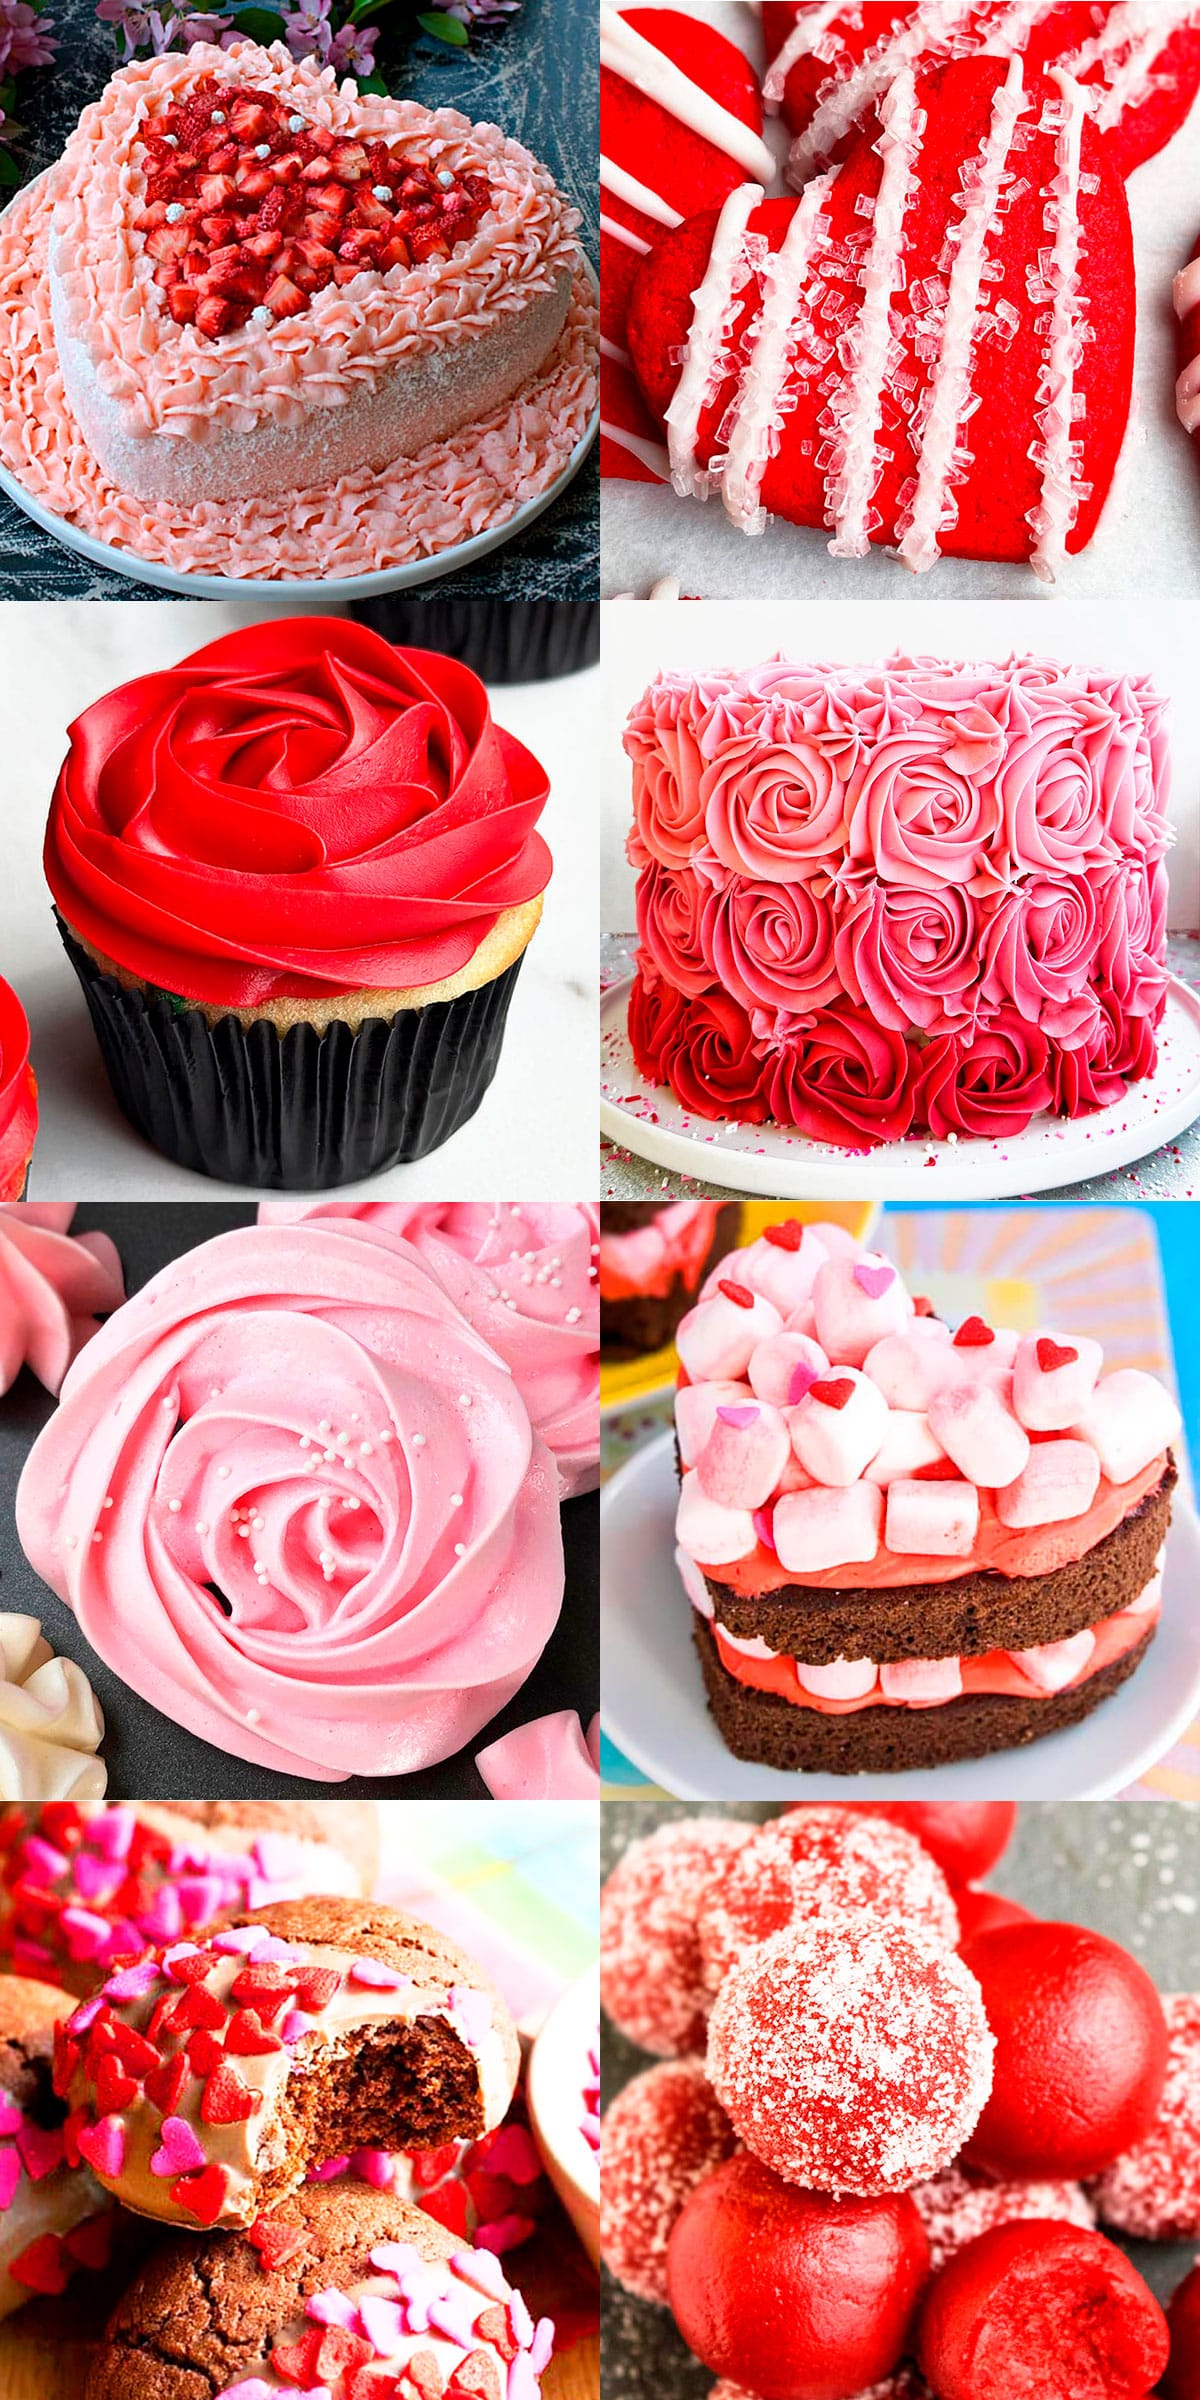 Collage Image With Valentine's Day Food Ideas.